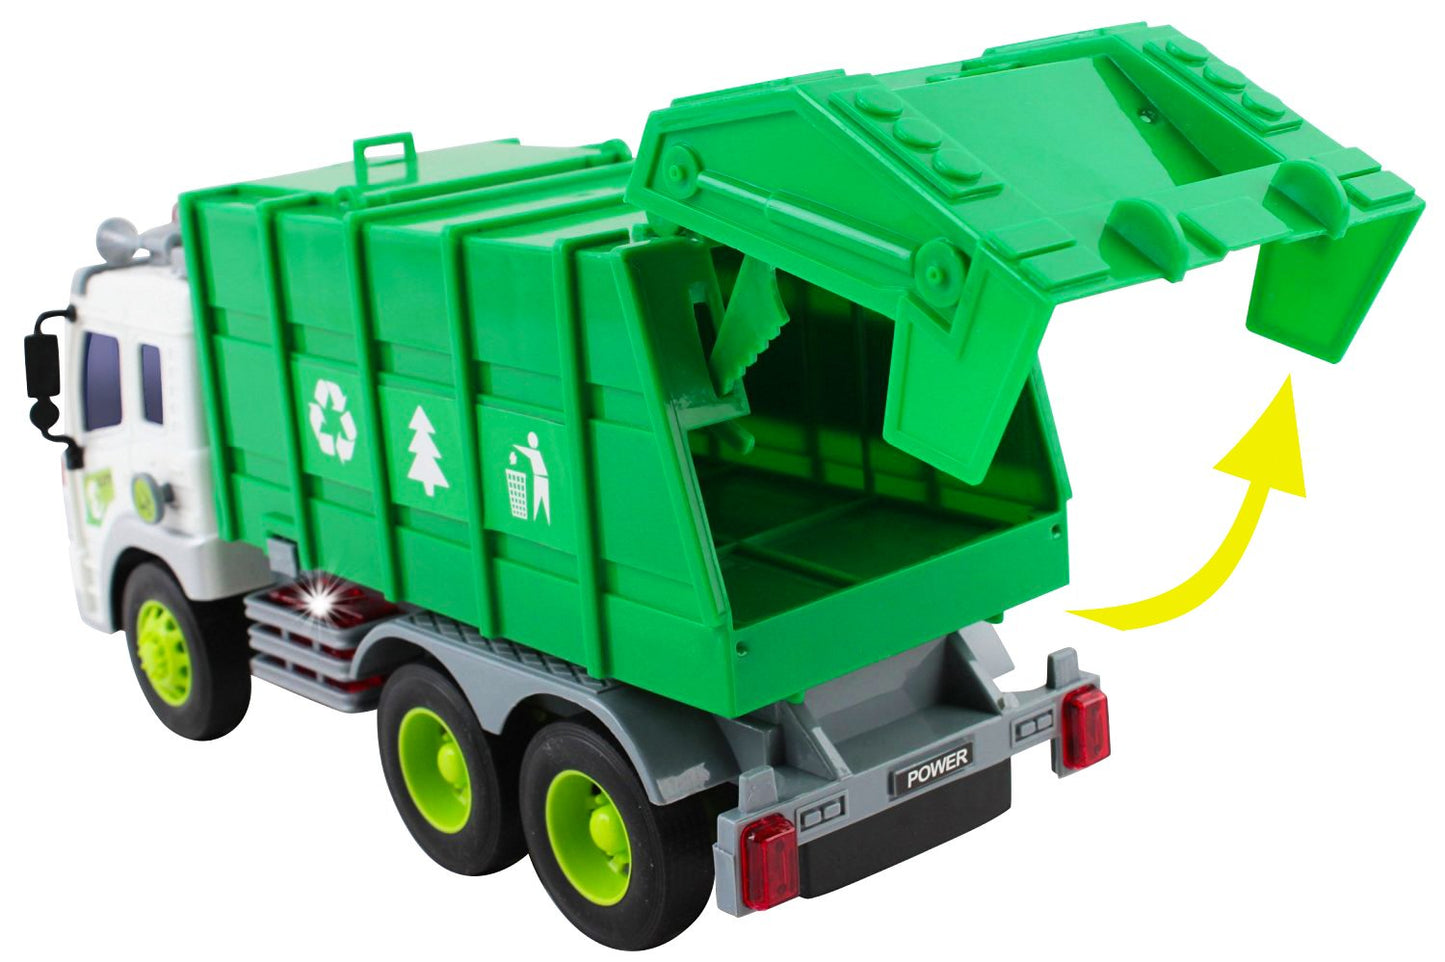 Friction Powered Sanitation Garbage Truck 1:16 Toy Vehicle with Lights and Sounds